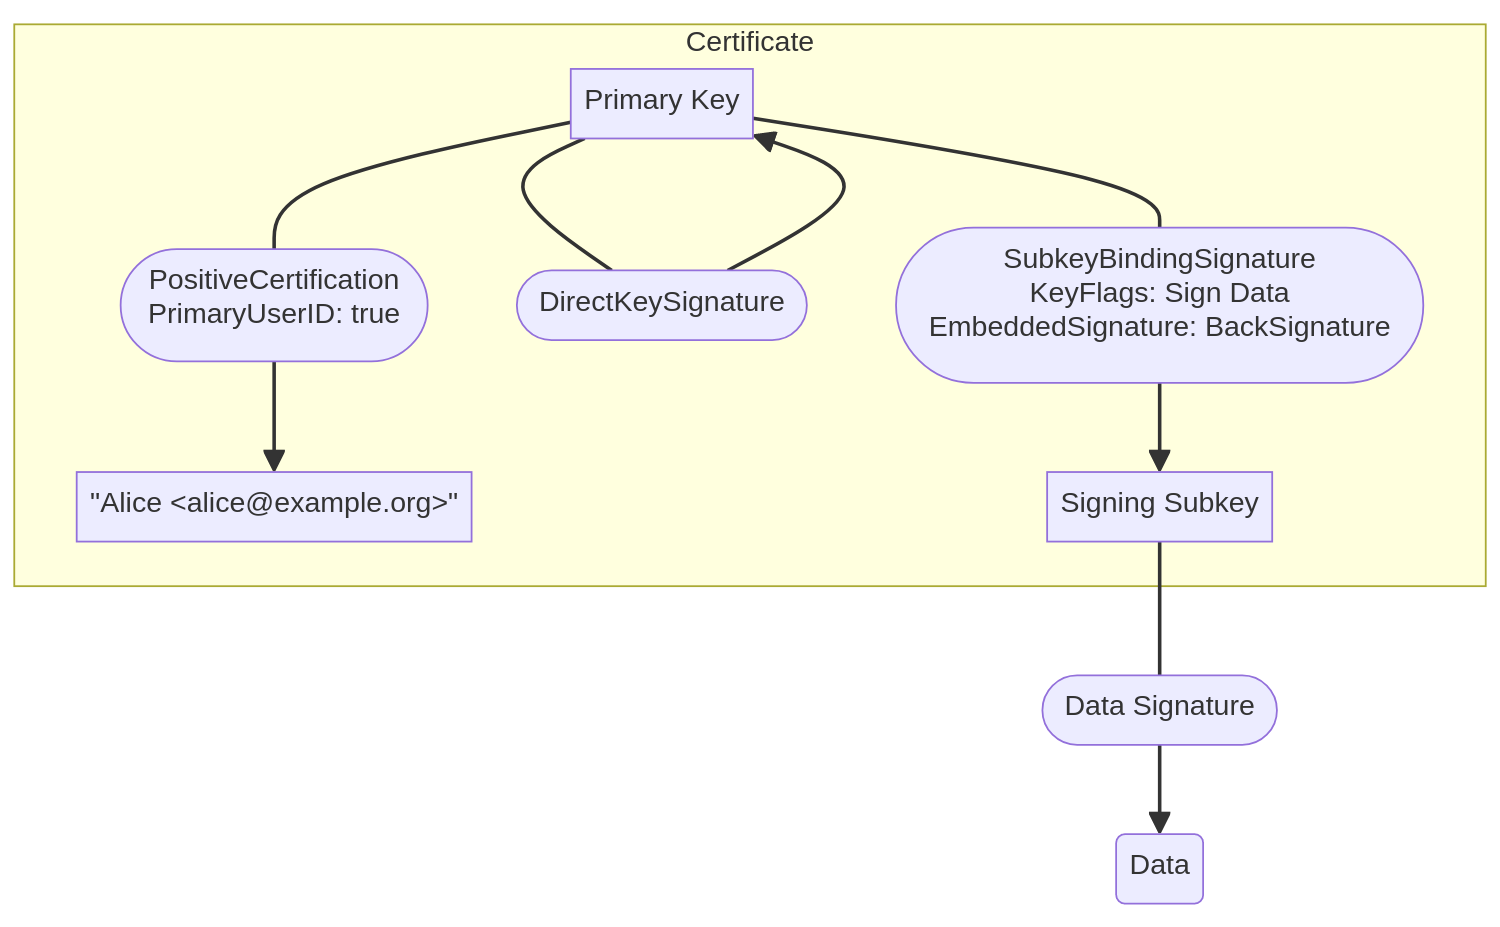 Depicts a diagrammatic representation of a certificate and a data signature. Arrows between the primary key and other components of the certificate show, how signatures bind the certificate together. In this example, they form a tree of signatures, which all need to be verified in order for the data signature to be valid.